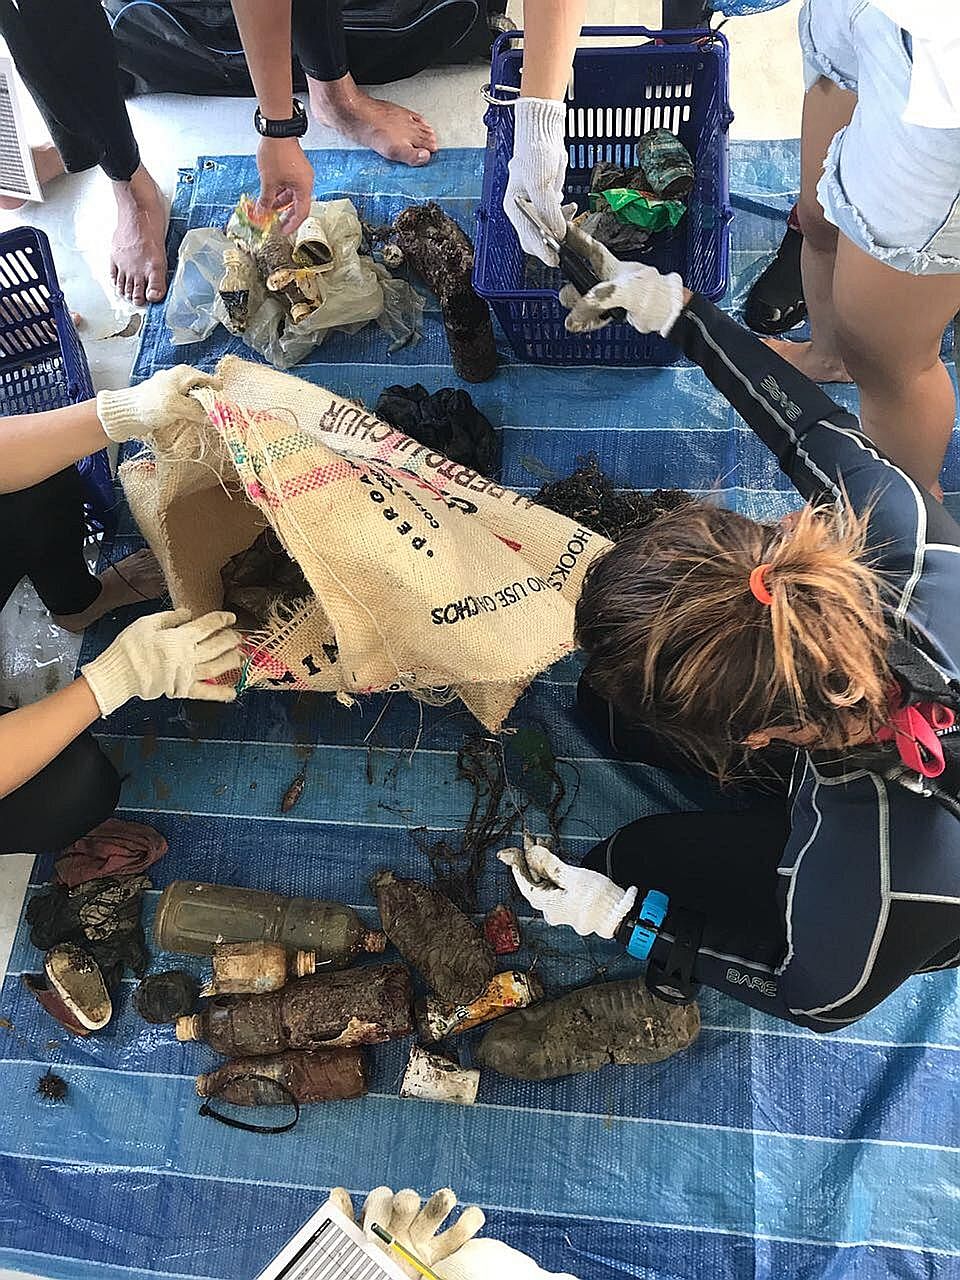 Volunteers sorting out marine trash at the Sunday event to mark World Oceans Day today. It was the first community-led underwater clean-up effort here involving multiple partners.